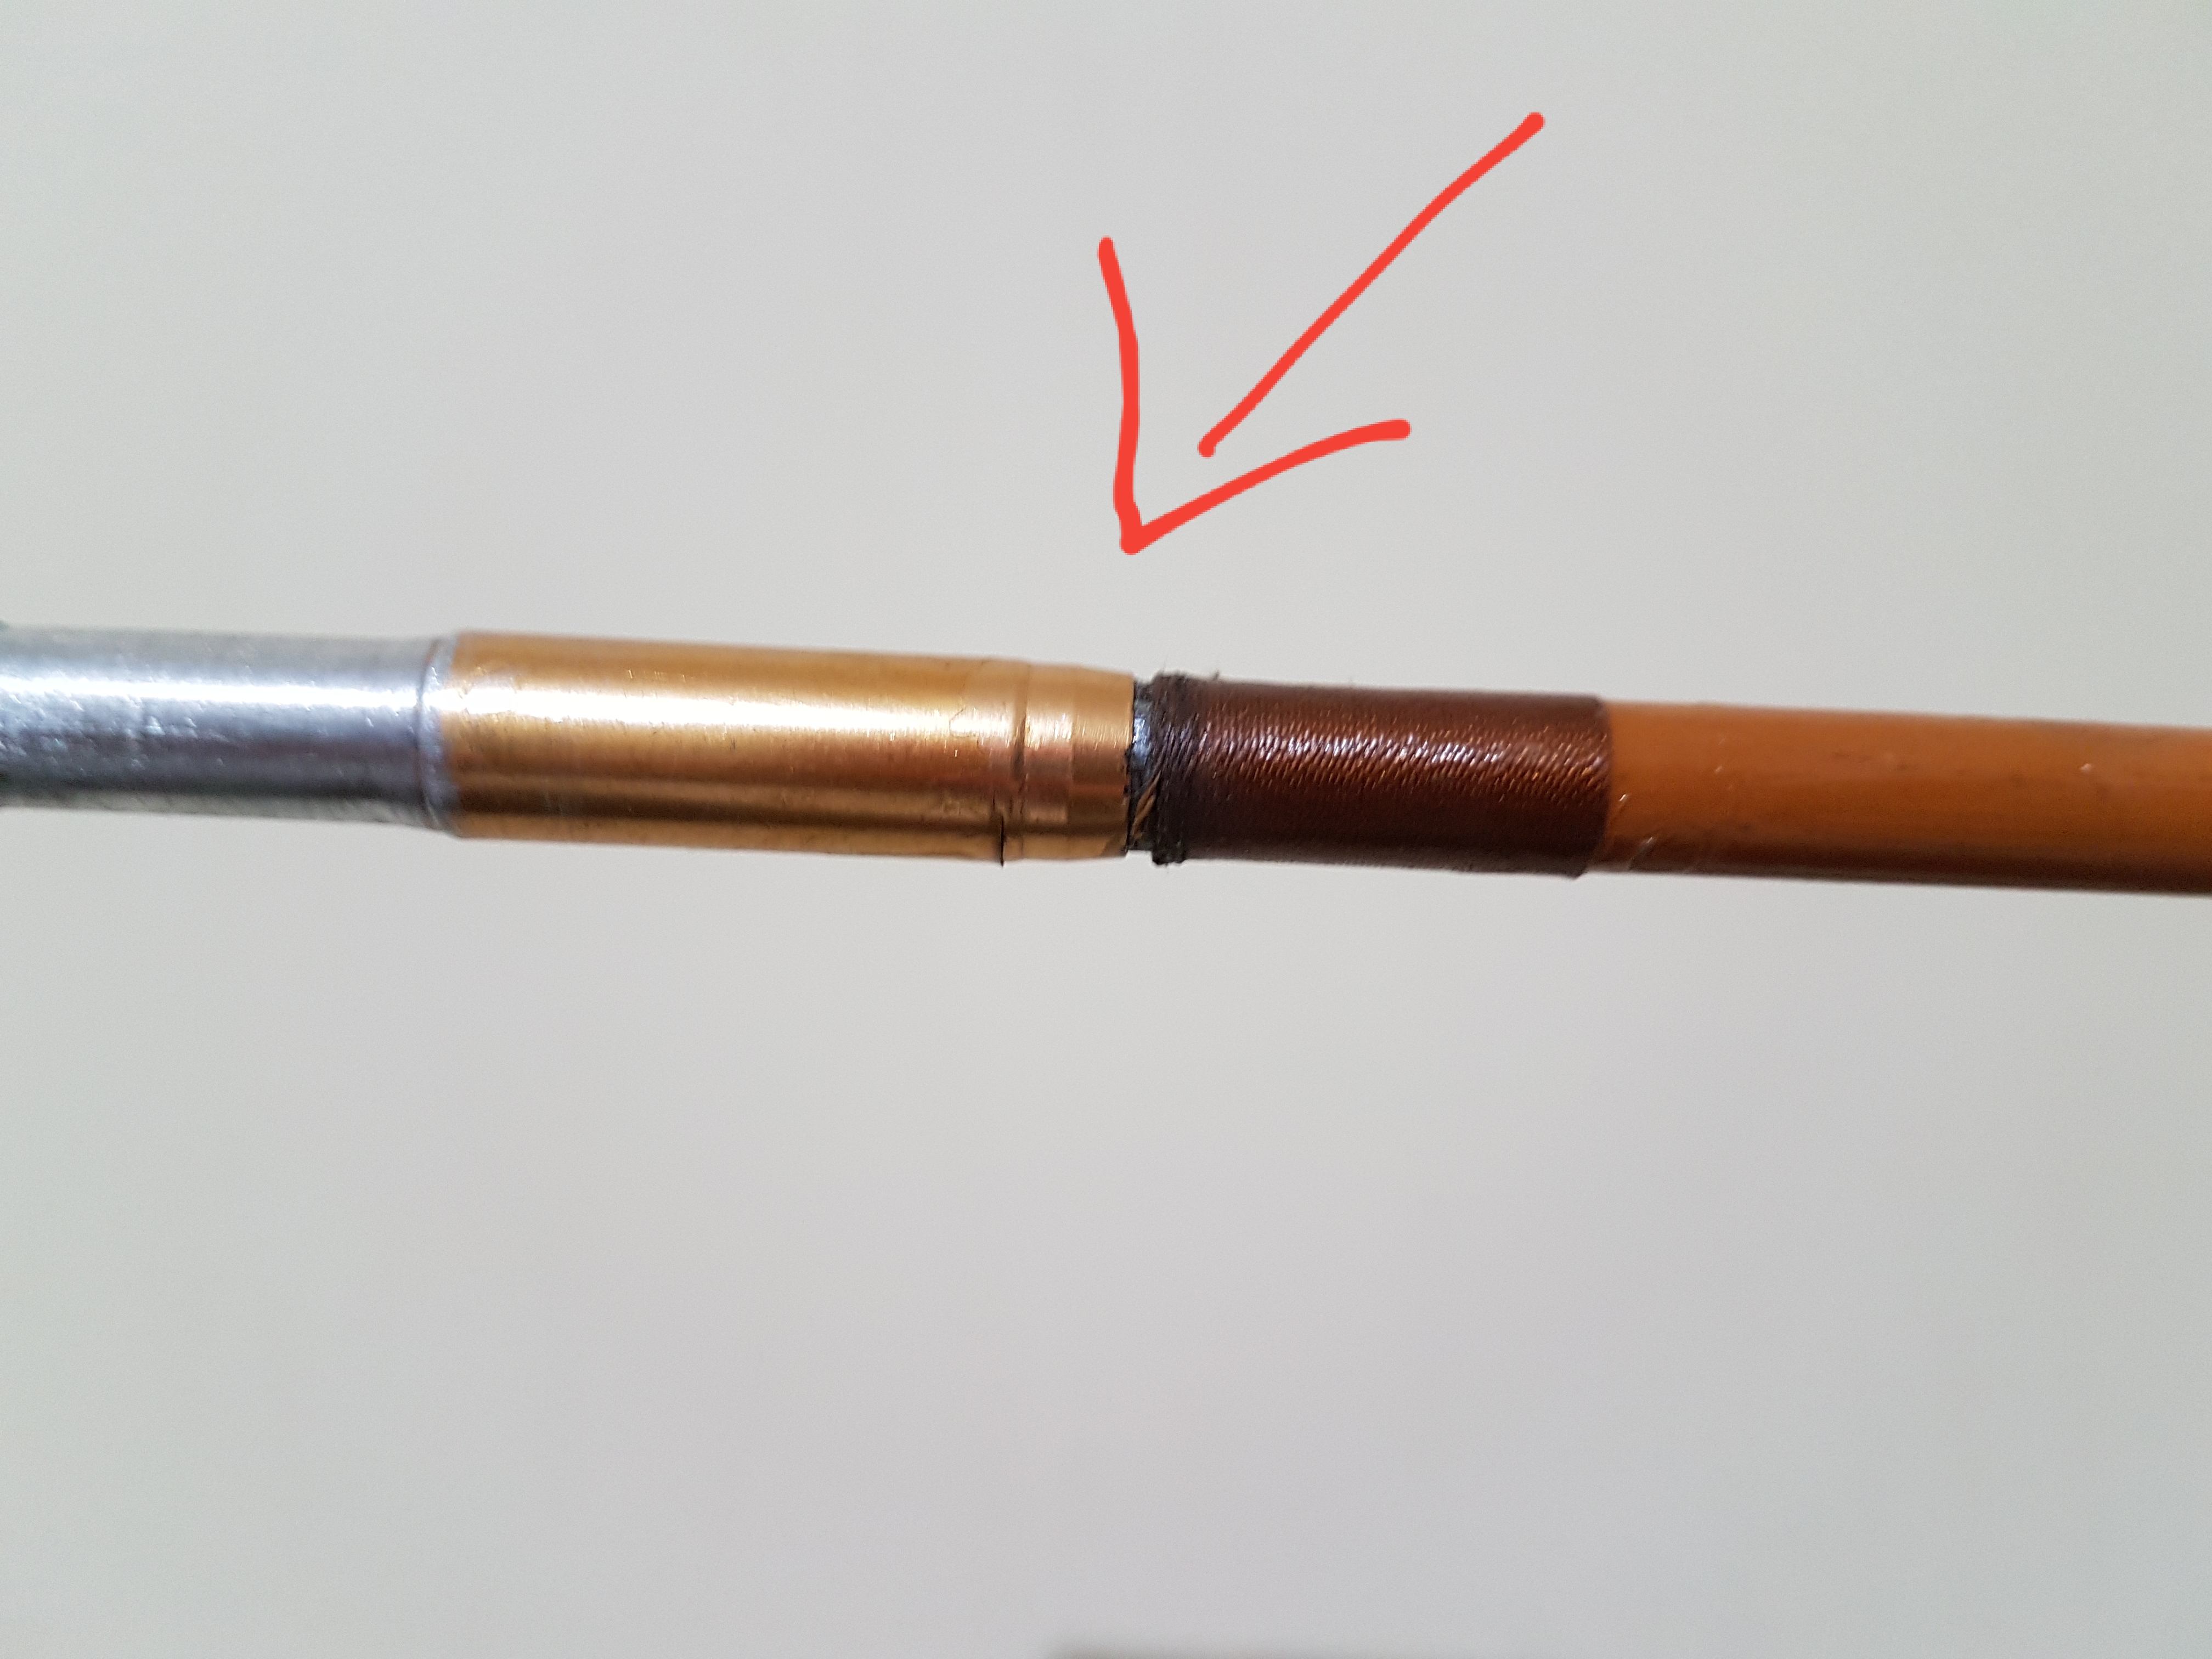 need help on how to order ferrules for fishing rods